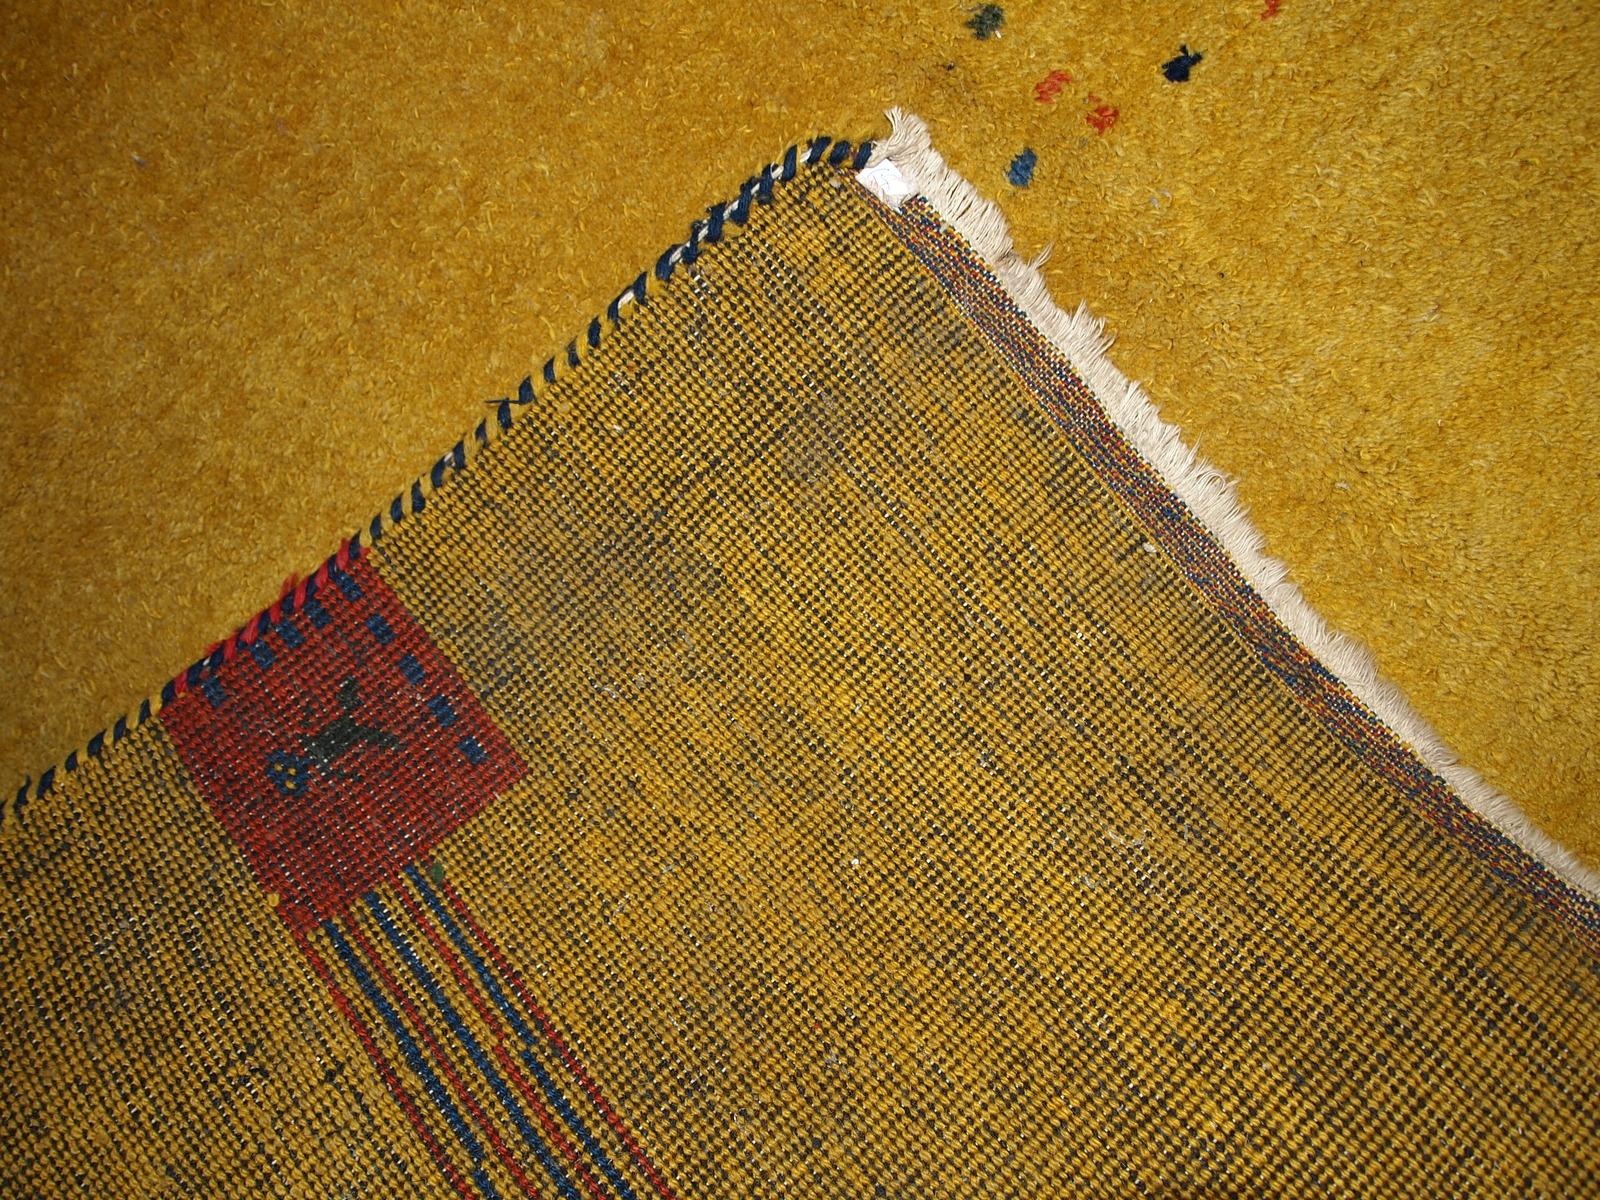 Vintage square Gabbeh rug in bright yellow color. This rug is thick heavy, made in the end of 20th century in wool.

-condition: original good,

-circa: 1970s,

-size: 6.5' x 6.6' (198cm x 201cm),

-material: wool,

-country of origin: